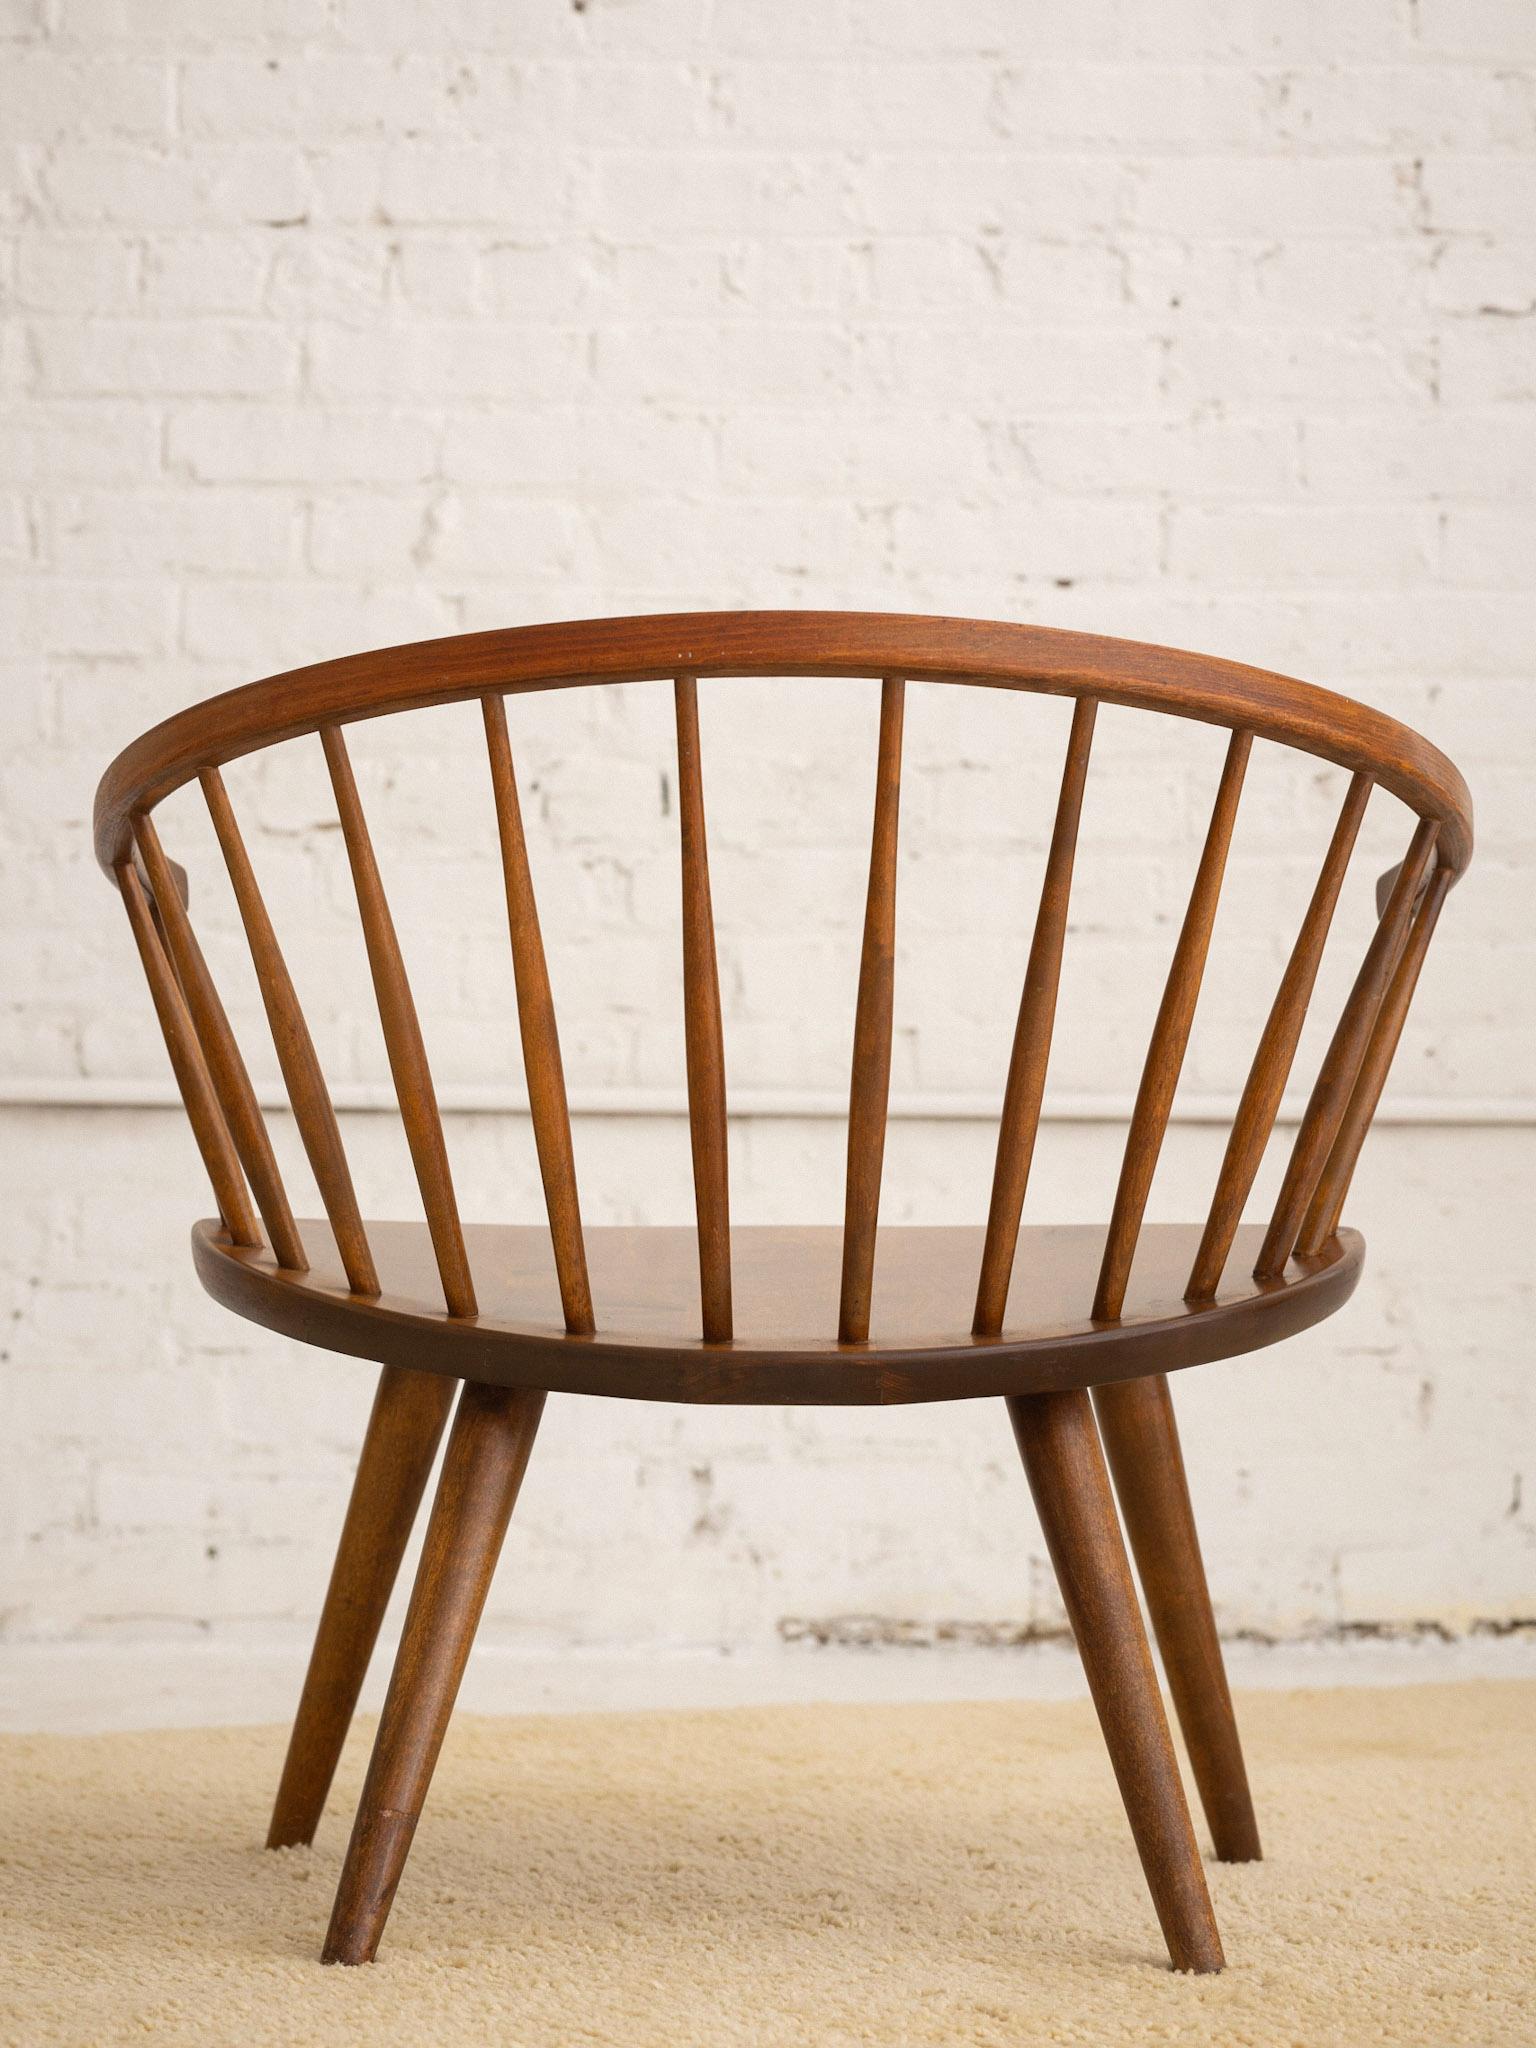 ‘Arka’ Solid Wood Spindle Back Lounge Chair by Yngve Ekström In Good Condition For Sale In Brooklyn, NY